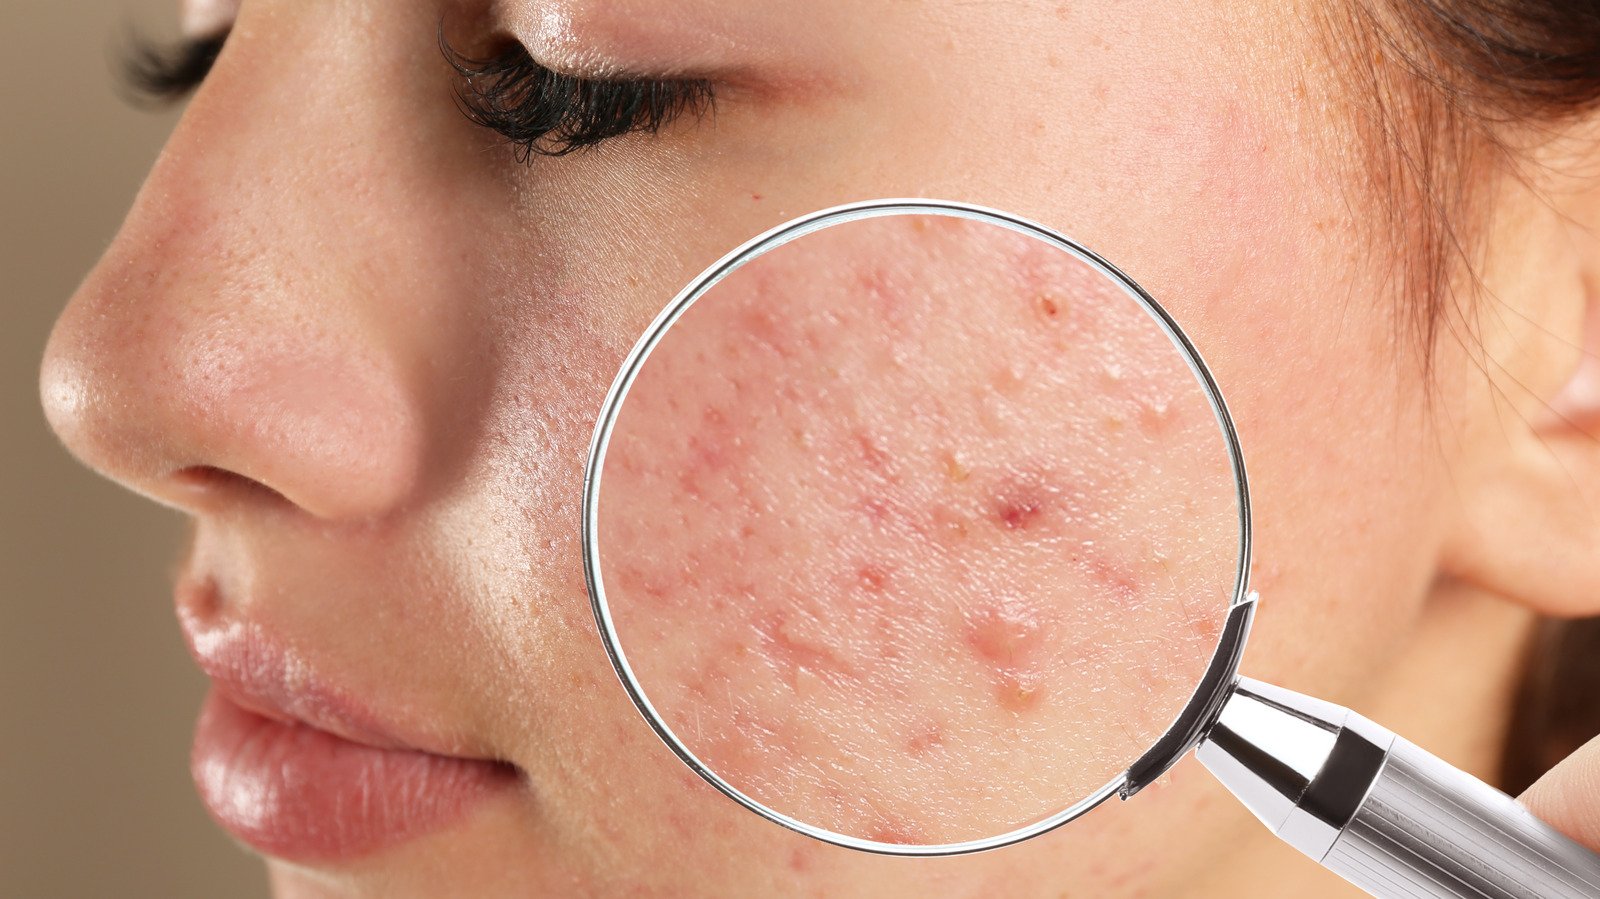 14 Causes Of Acne Flare-Ups You Might Not Know